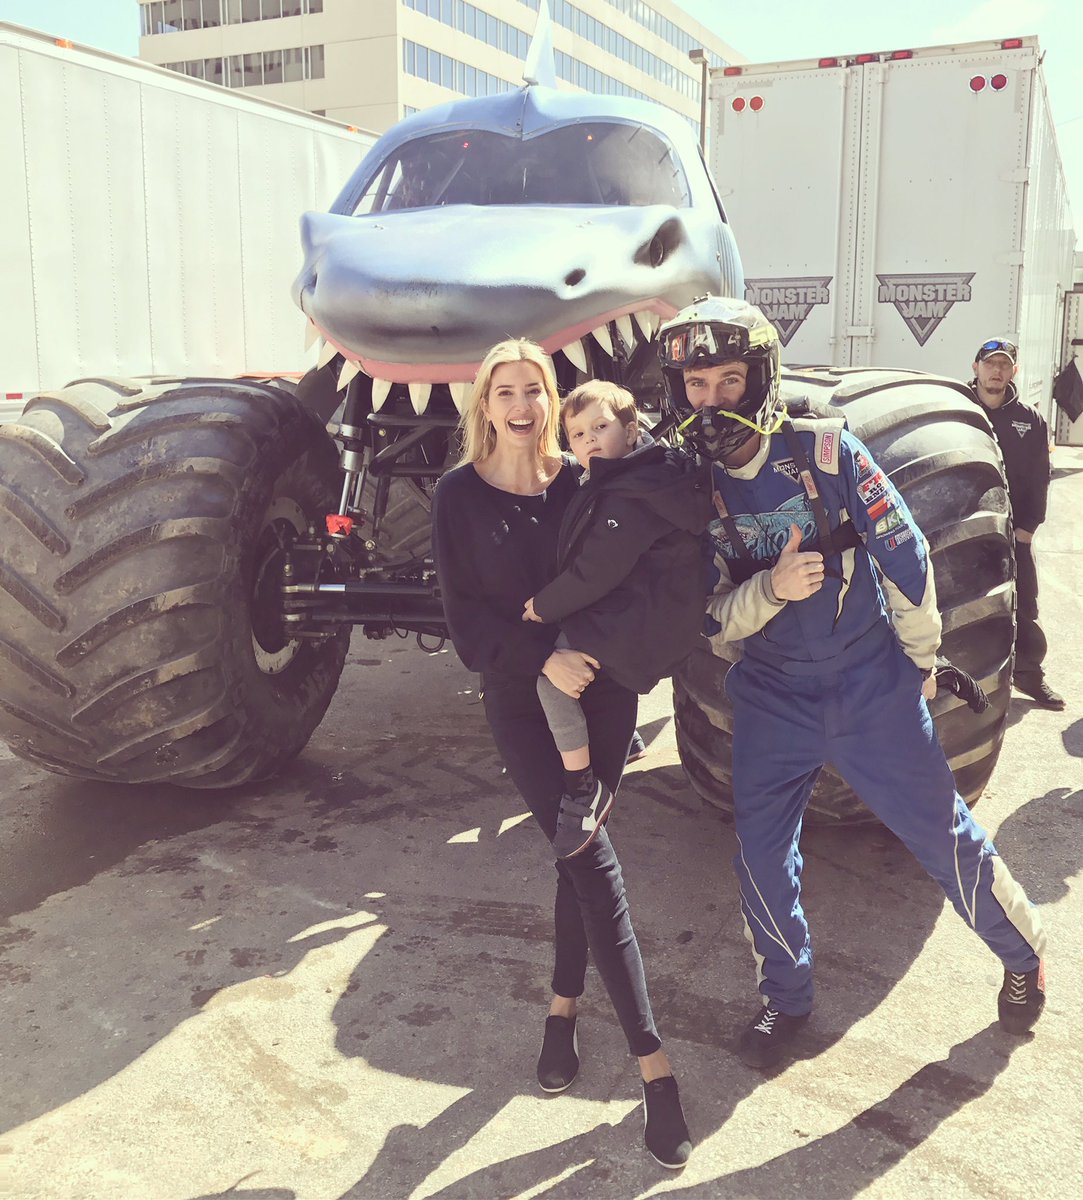 Epic first Monster Truck show with the kids! #MonsterJam https://t.co/a0beqvg1tn